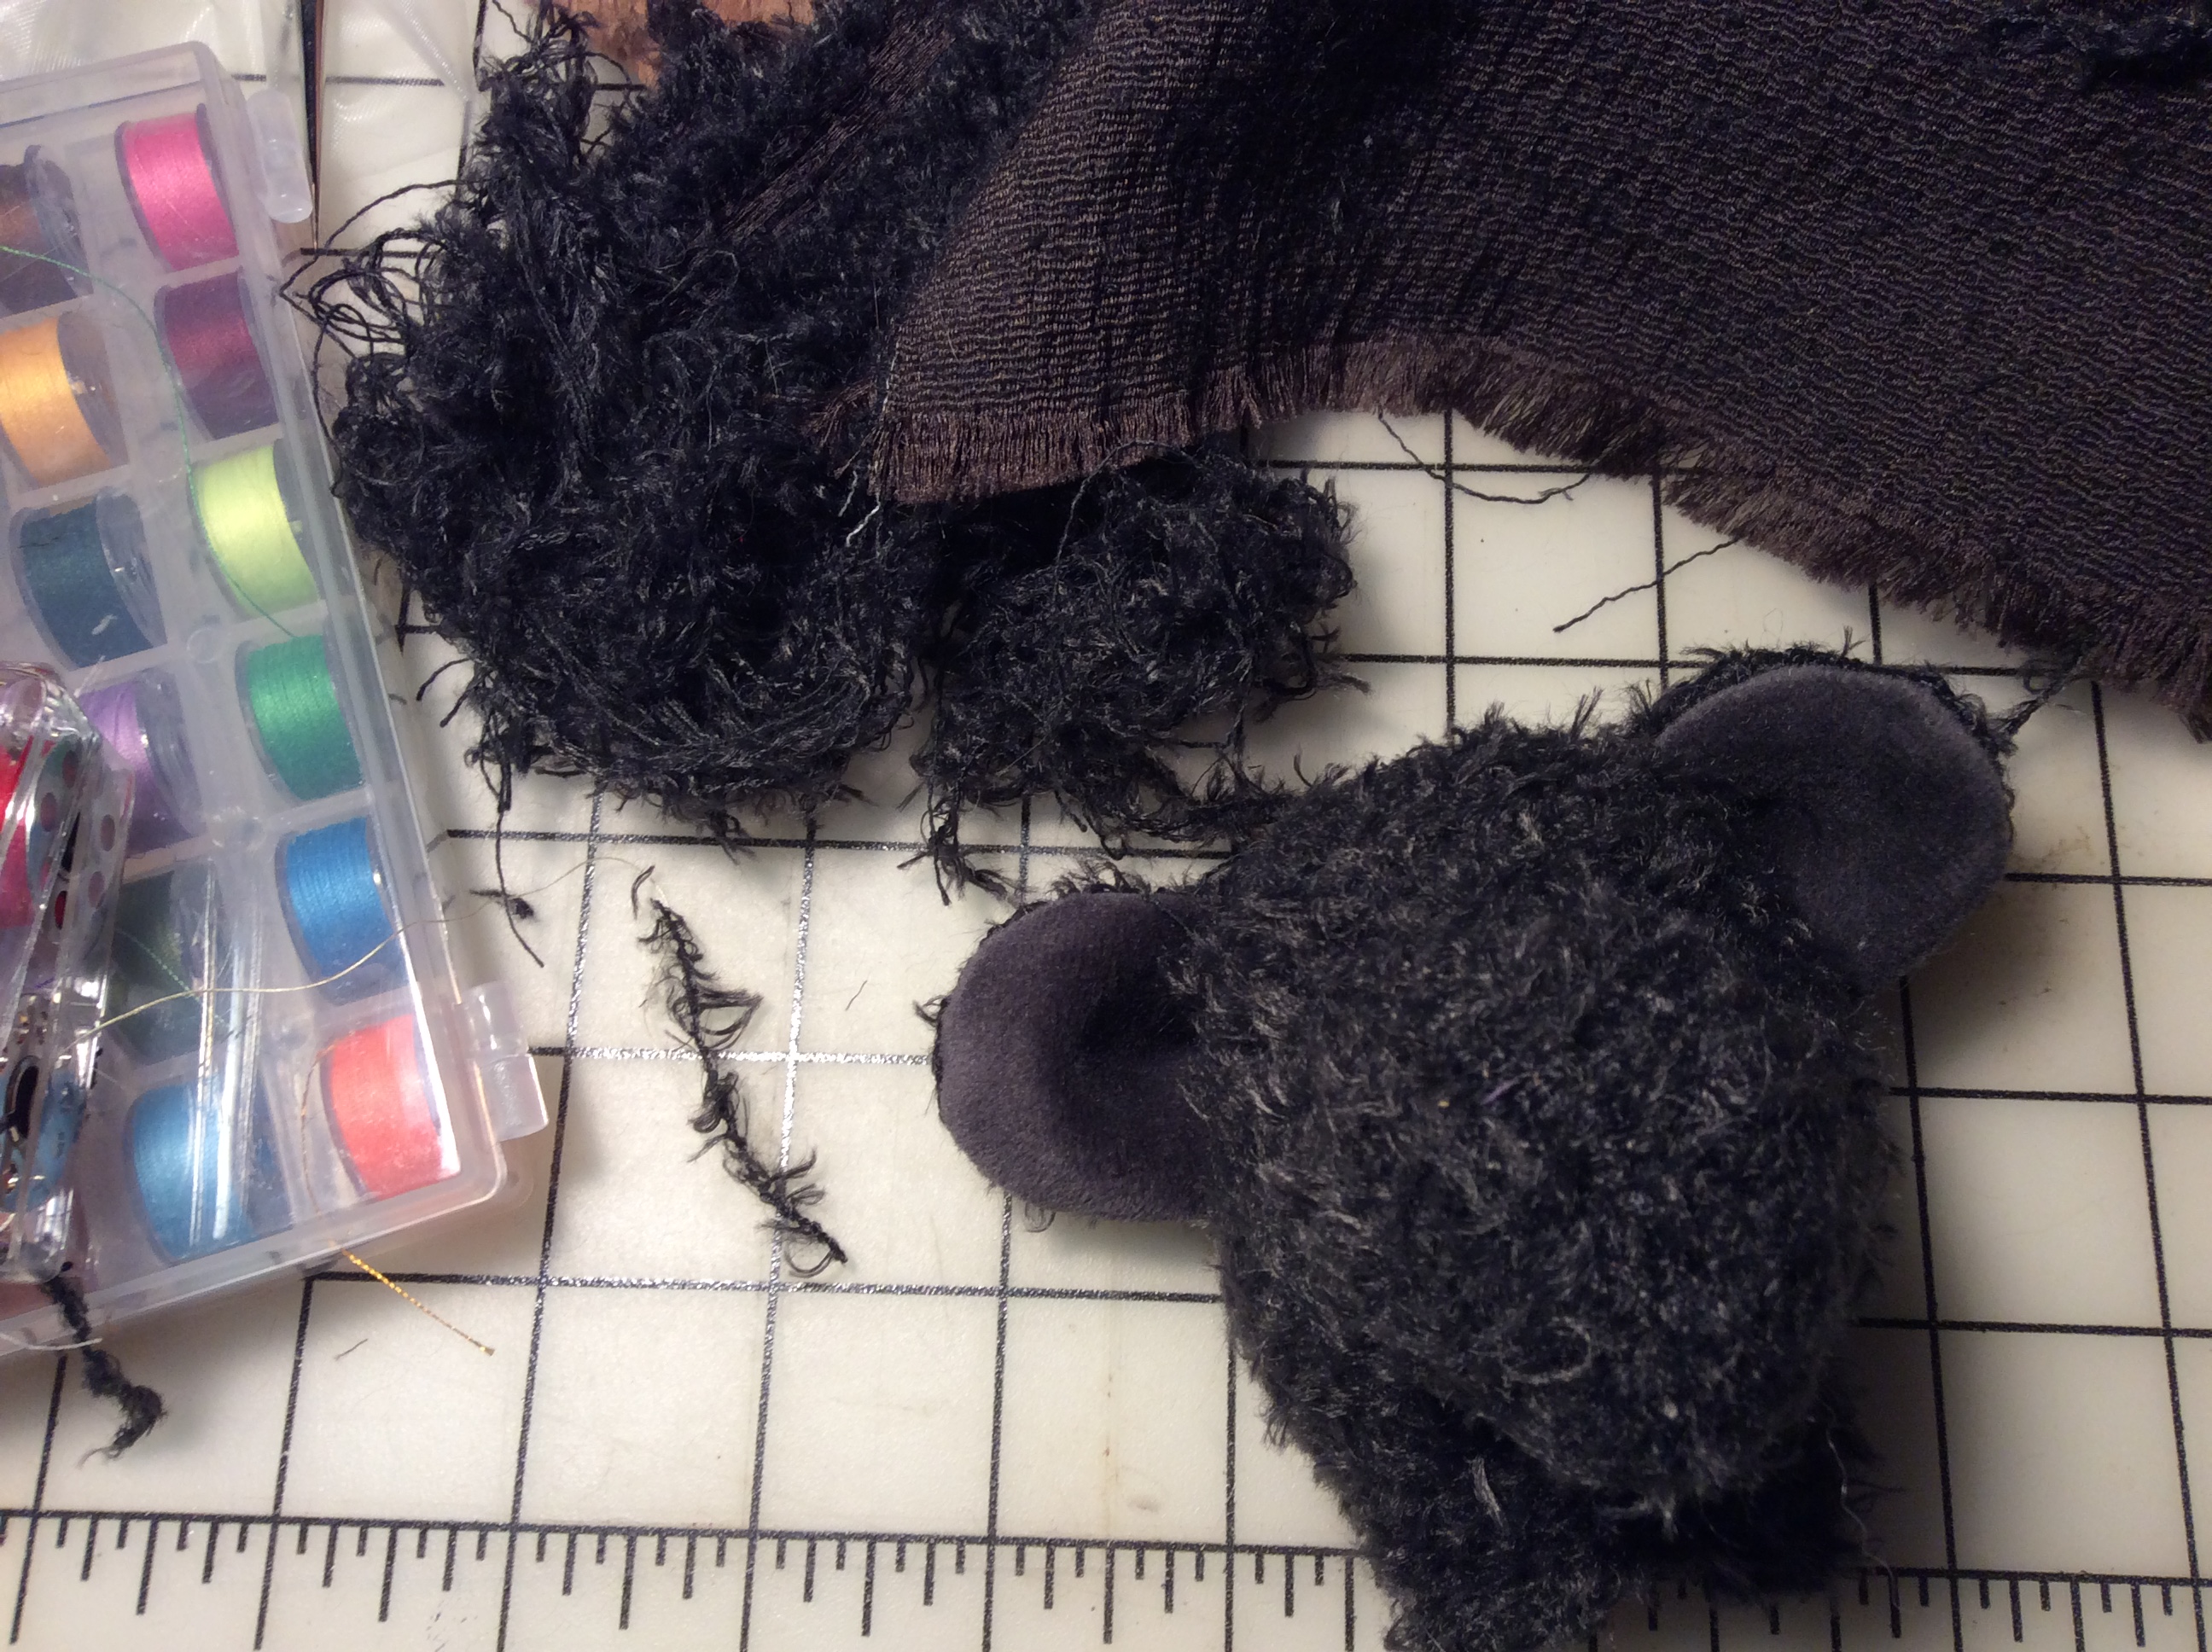 A black, unfinished teddy bear head next to a snarl of yarn as big as it is.